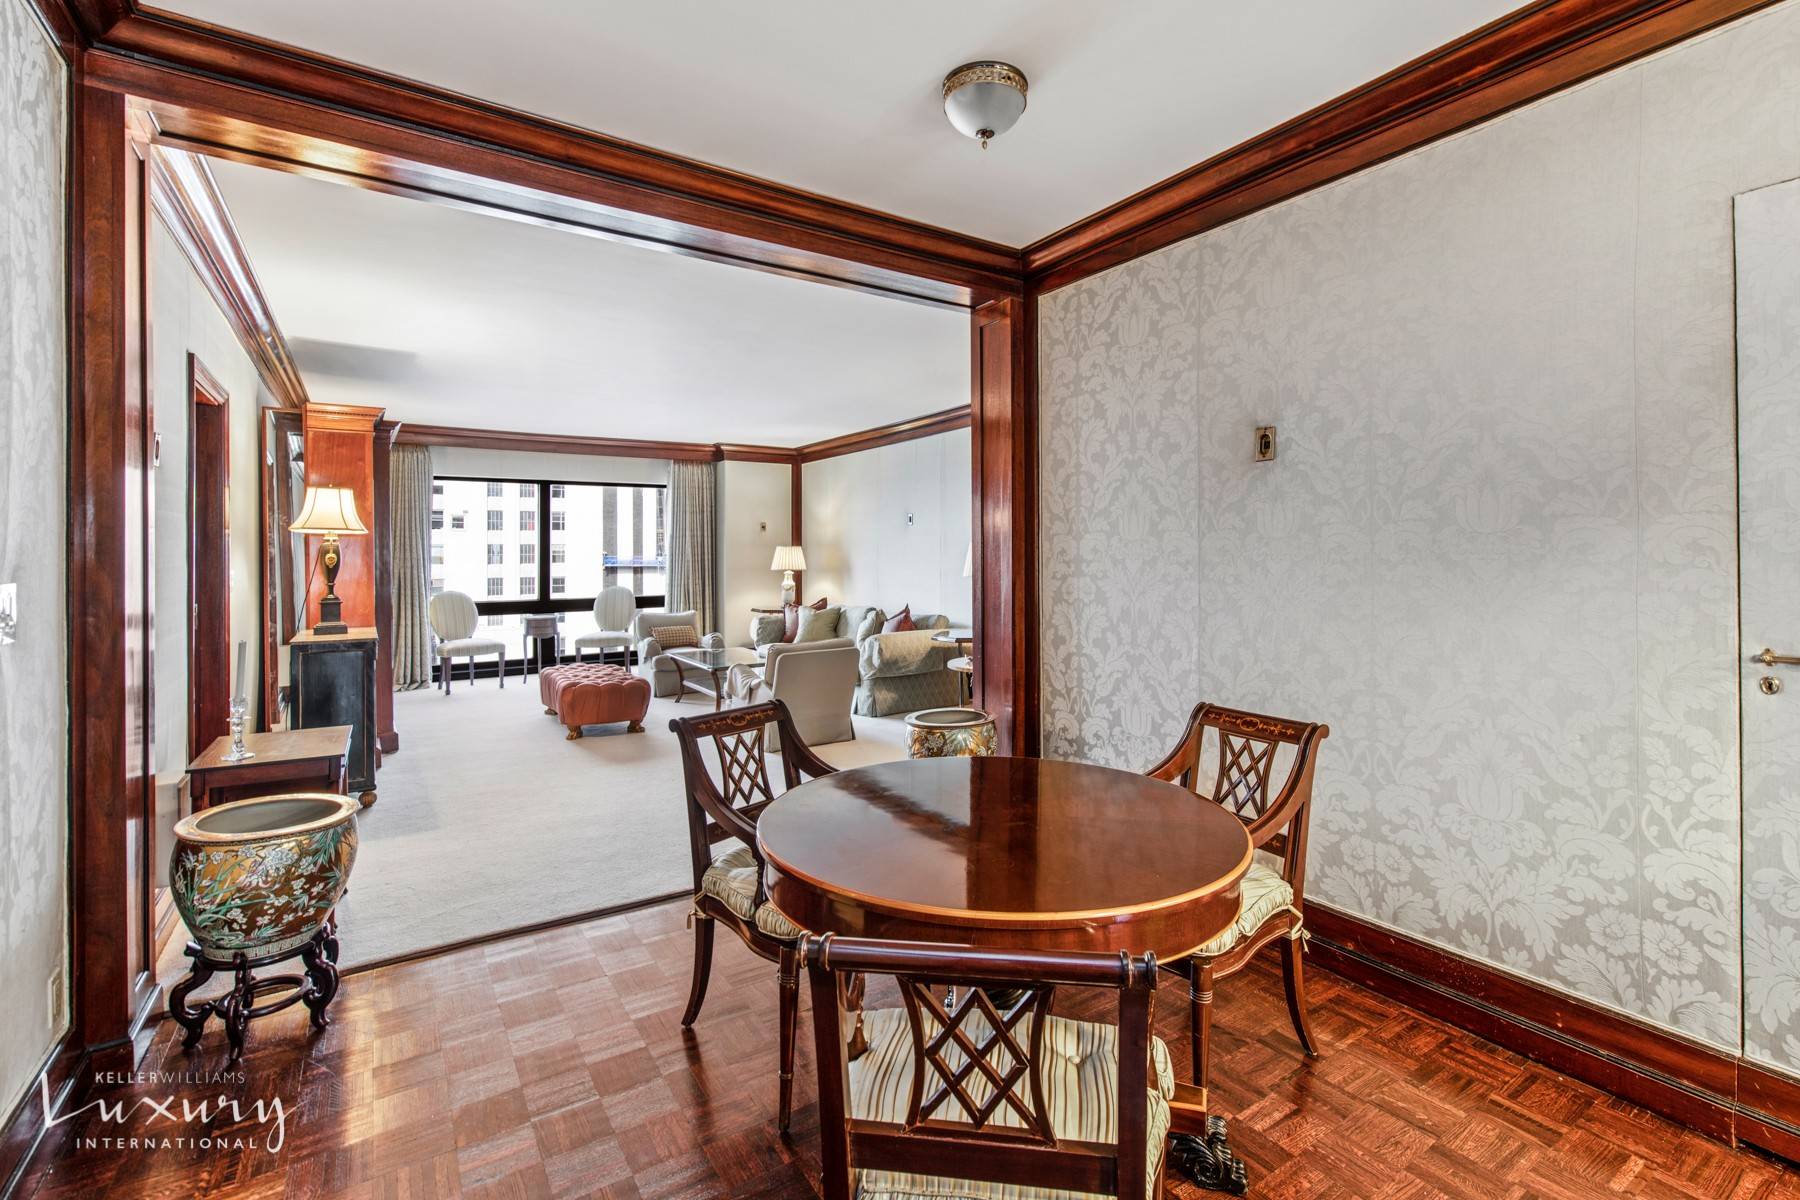 With spectacular views of Central Park, this elegant 1, 070 sq.